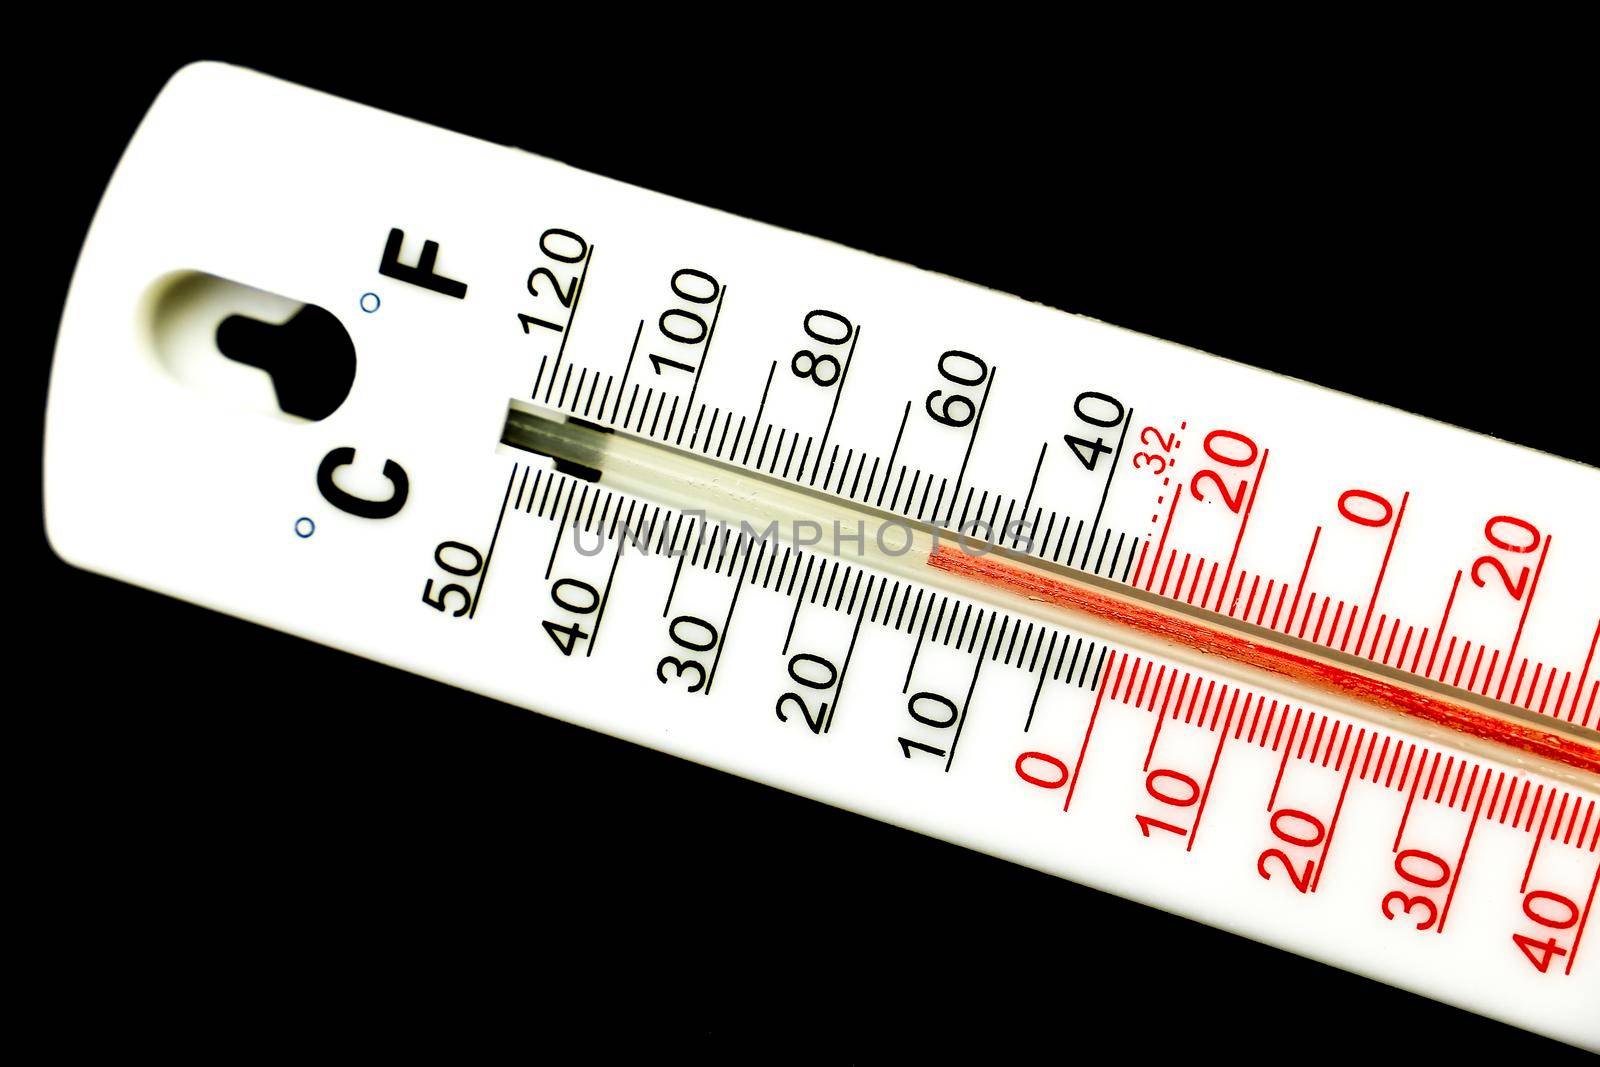 15 Celsius and almost 50 Fahrenheit degrees on a thermometer on black background